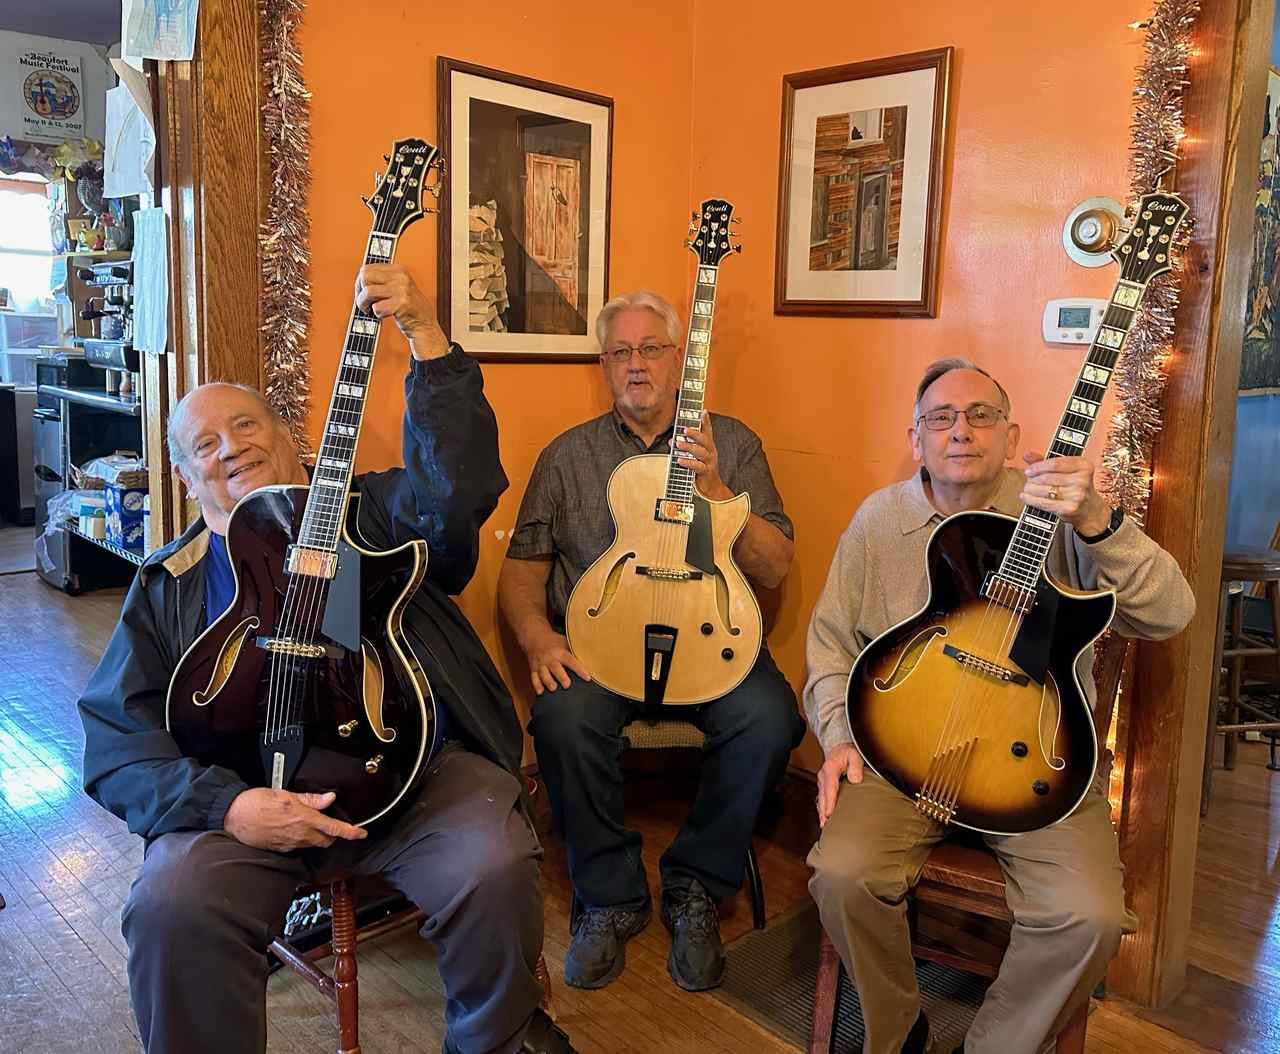 Pete, Tom & Vince, the three amigos share a moment with their three Conti Entrada archtop guitars!